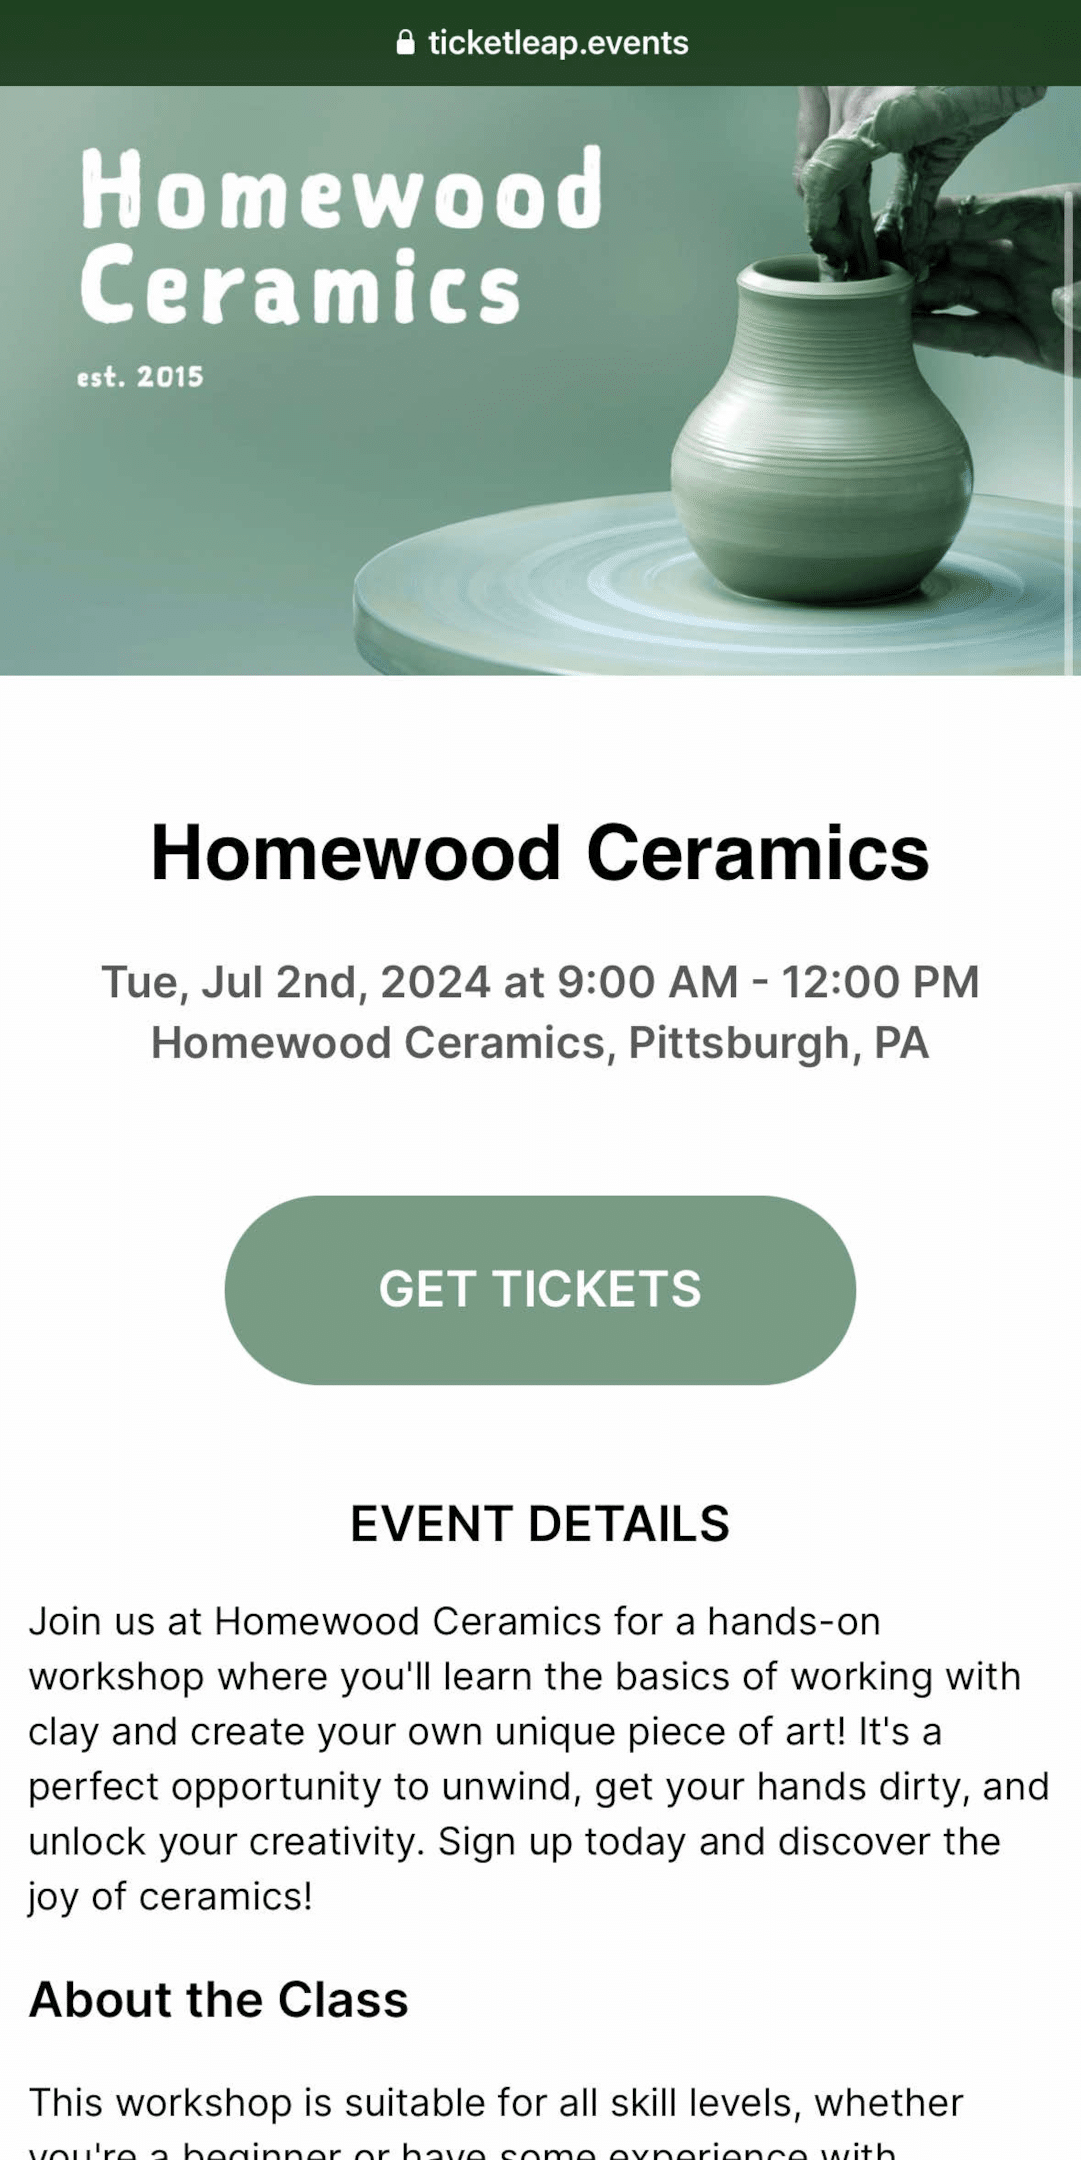 The mobile event page design for a pottery event landing page example